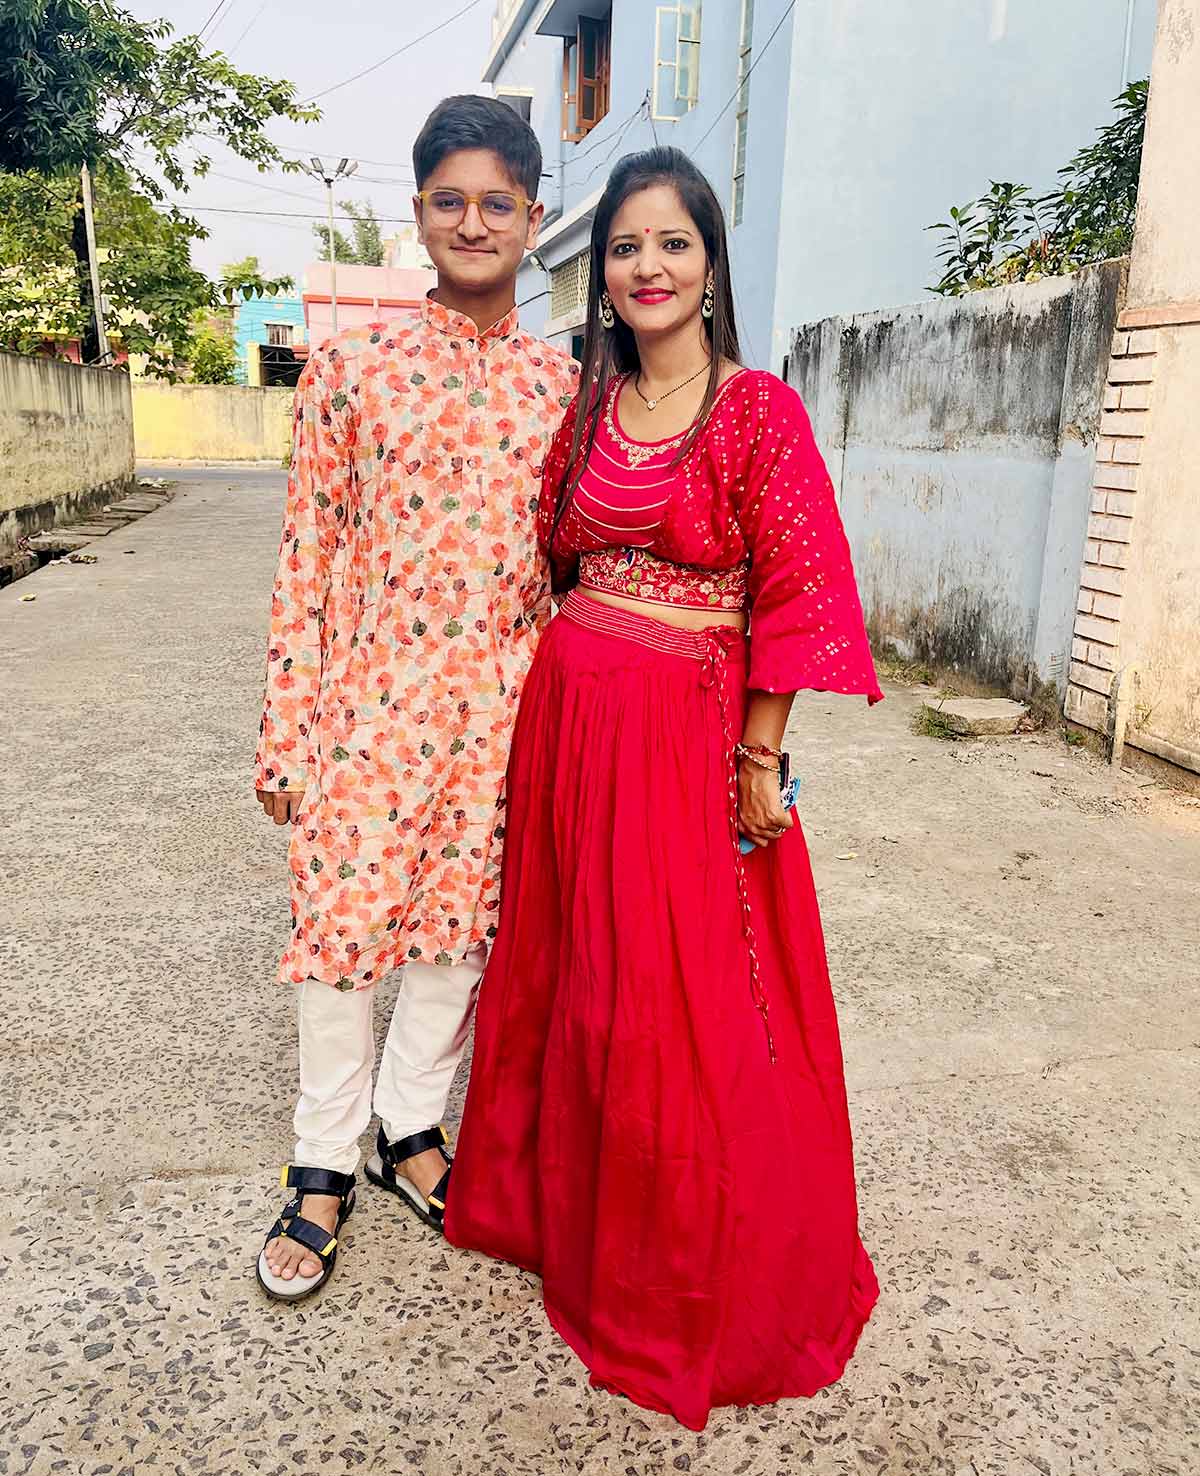 Aayan Agarwalla with his mother, Puja